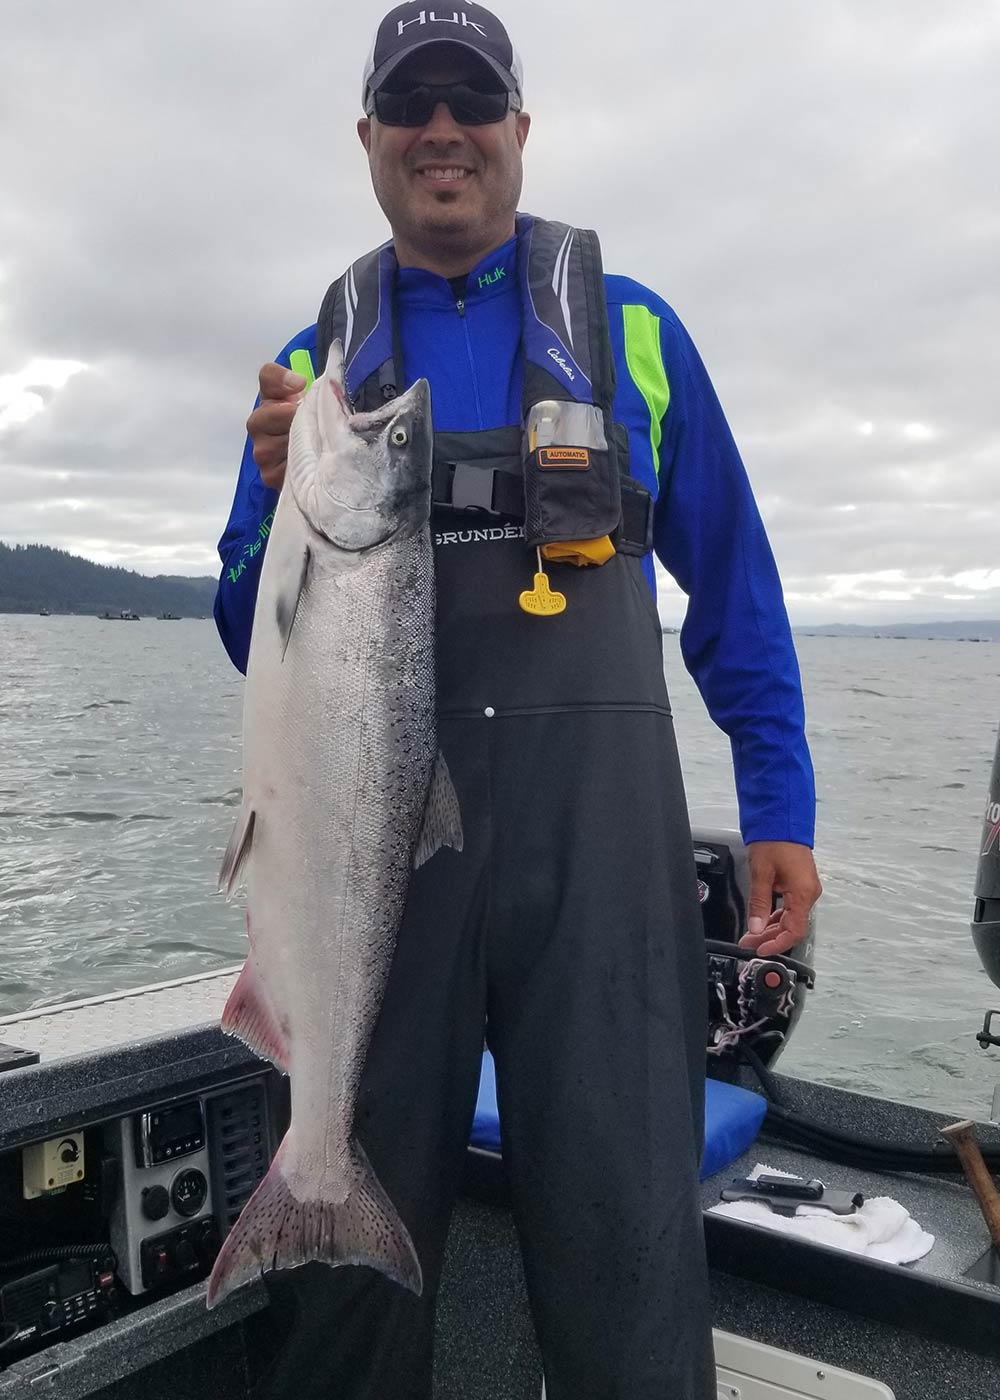 Columbia River Buoy 10: August 15, 2019